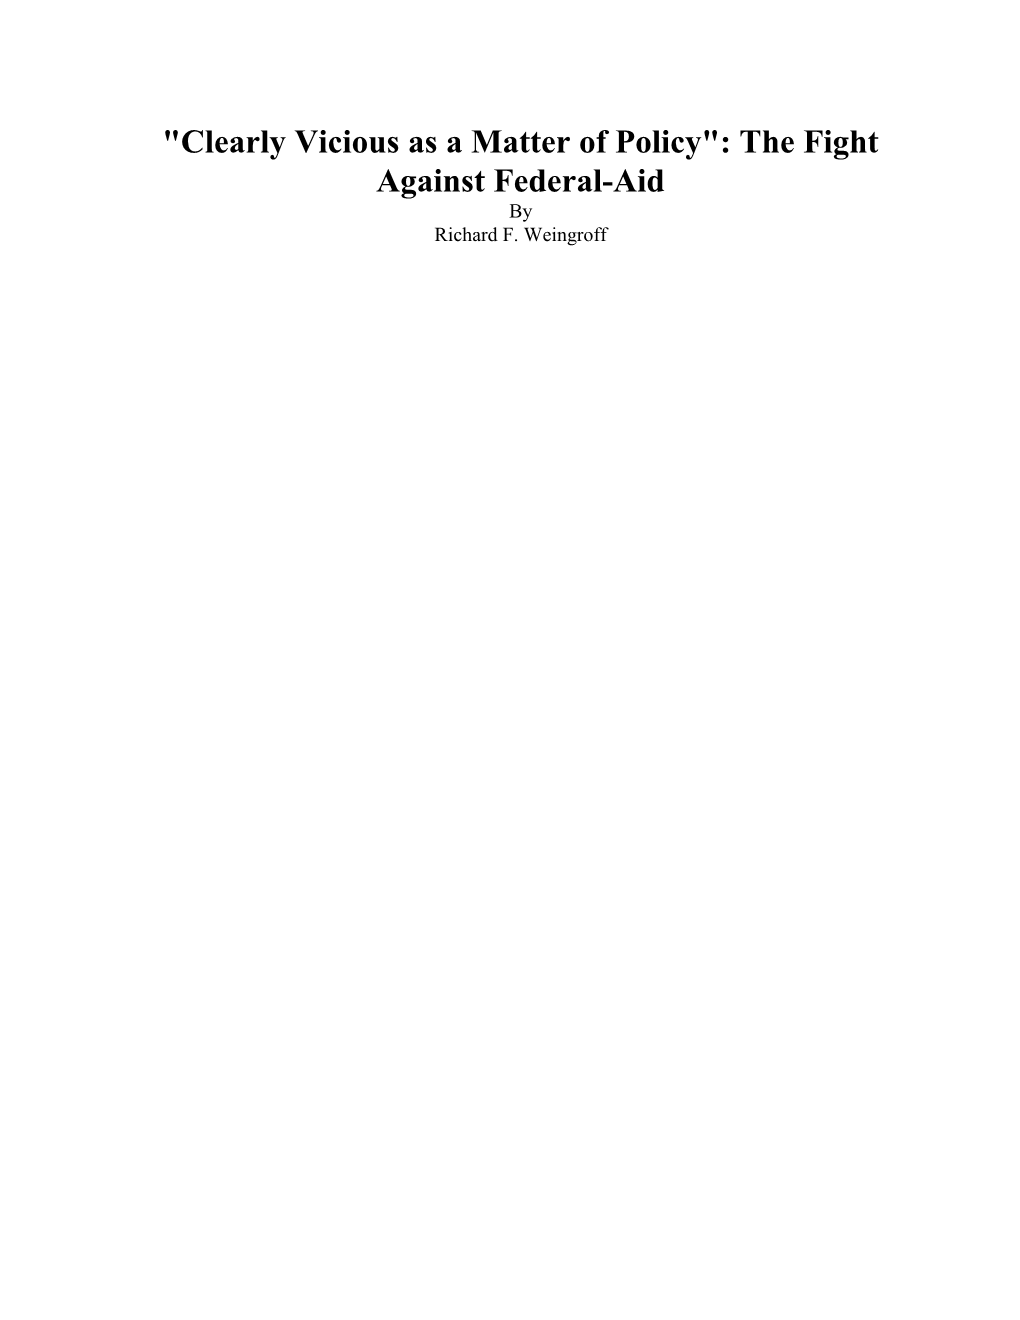 "Clearly Vicious As a Matter of Policy": the Fight Against Federal-Aid by Richard F